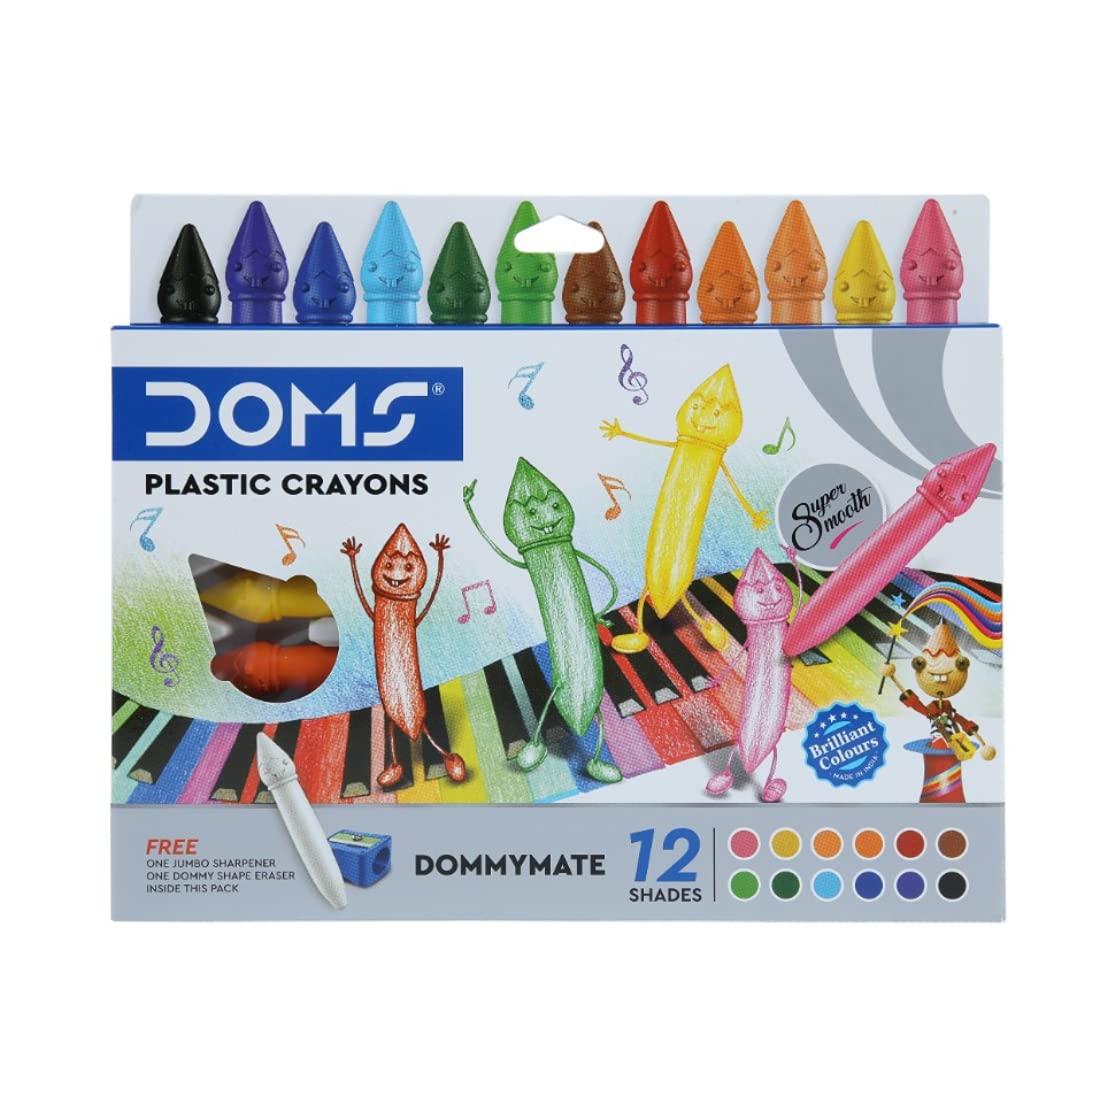 DOMS Dommymate Plastic Crayon 12 Shades (Set of 1- Multicolor)